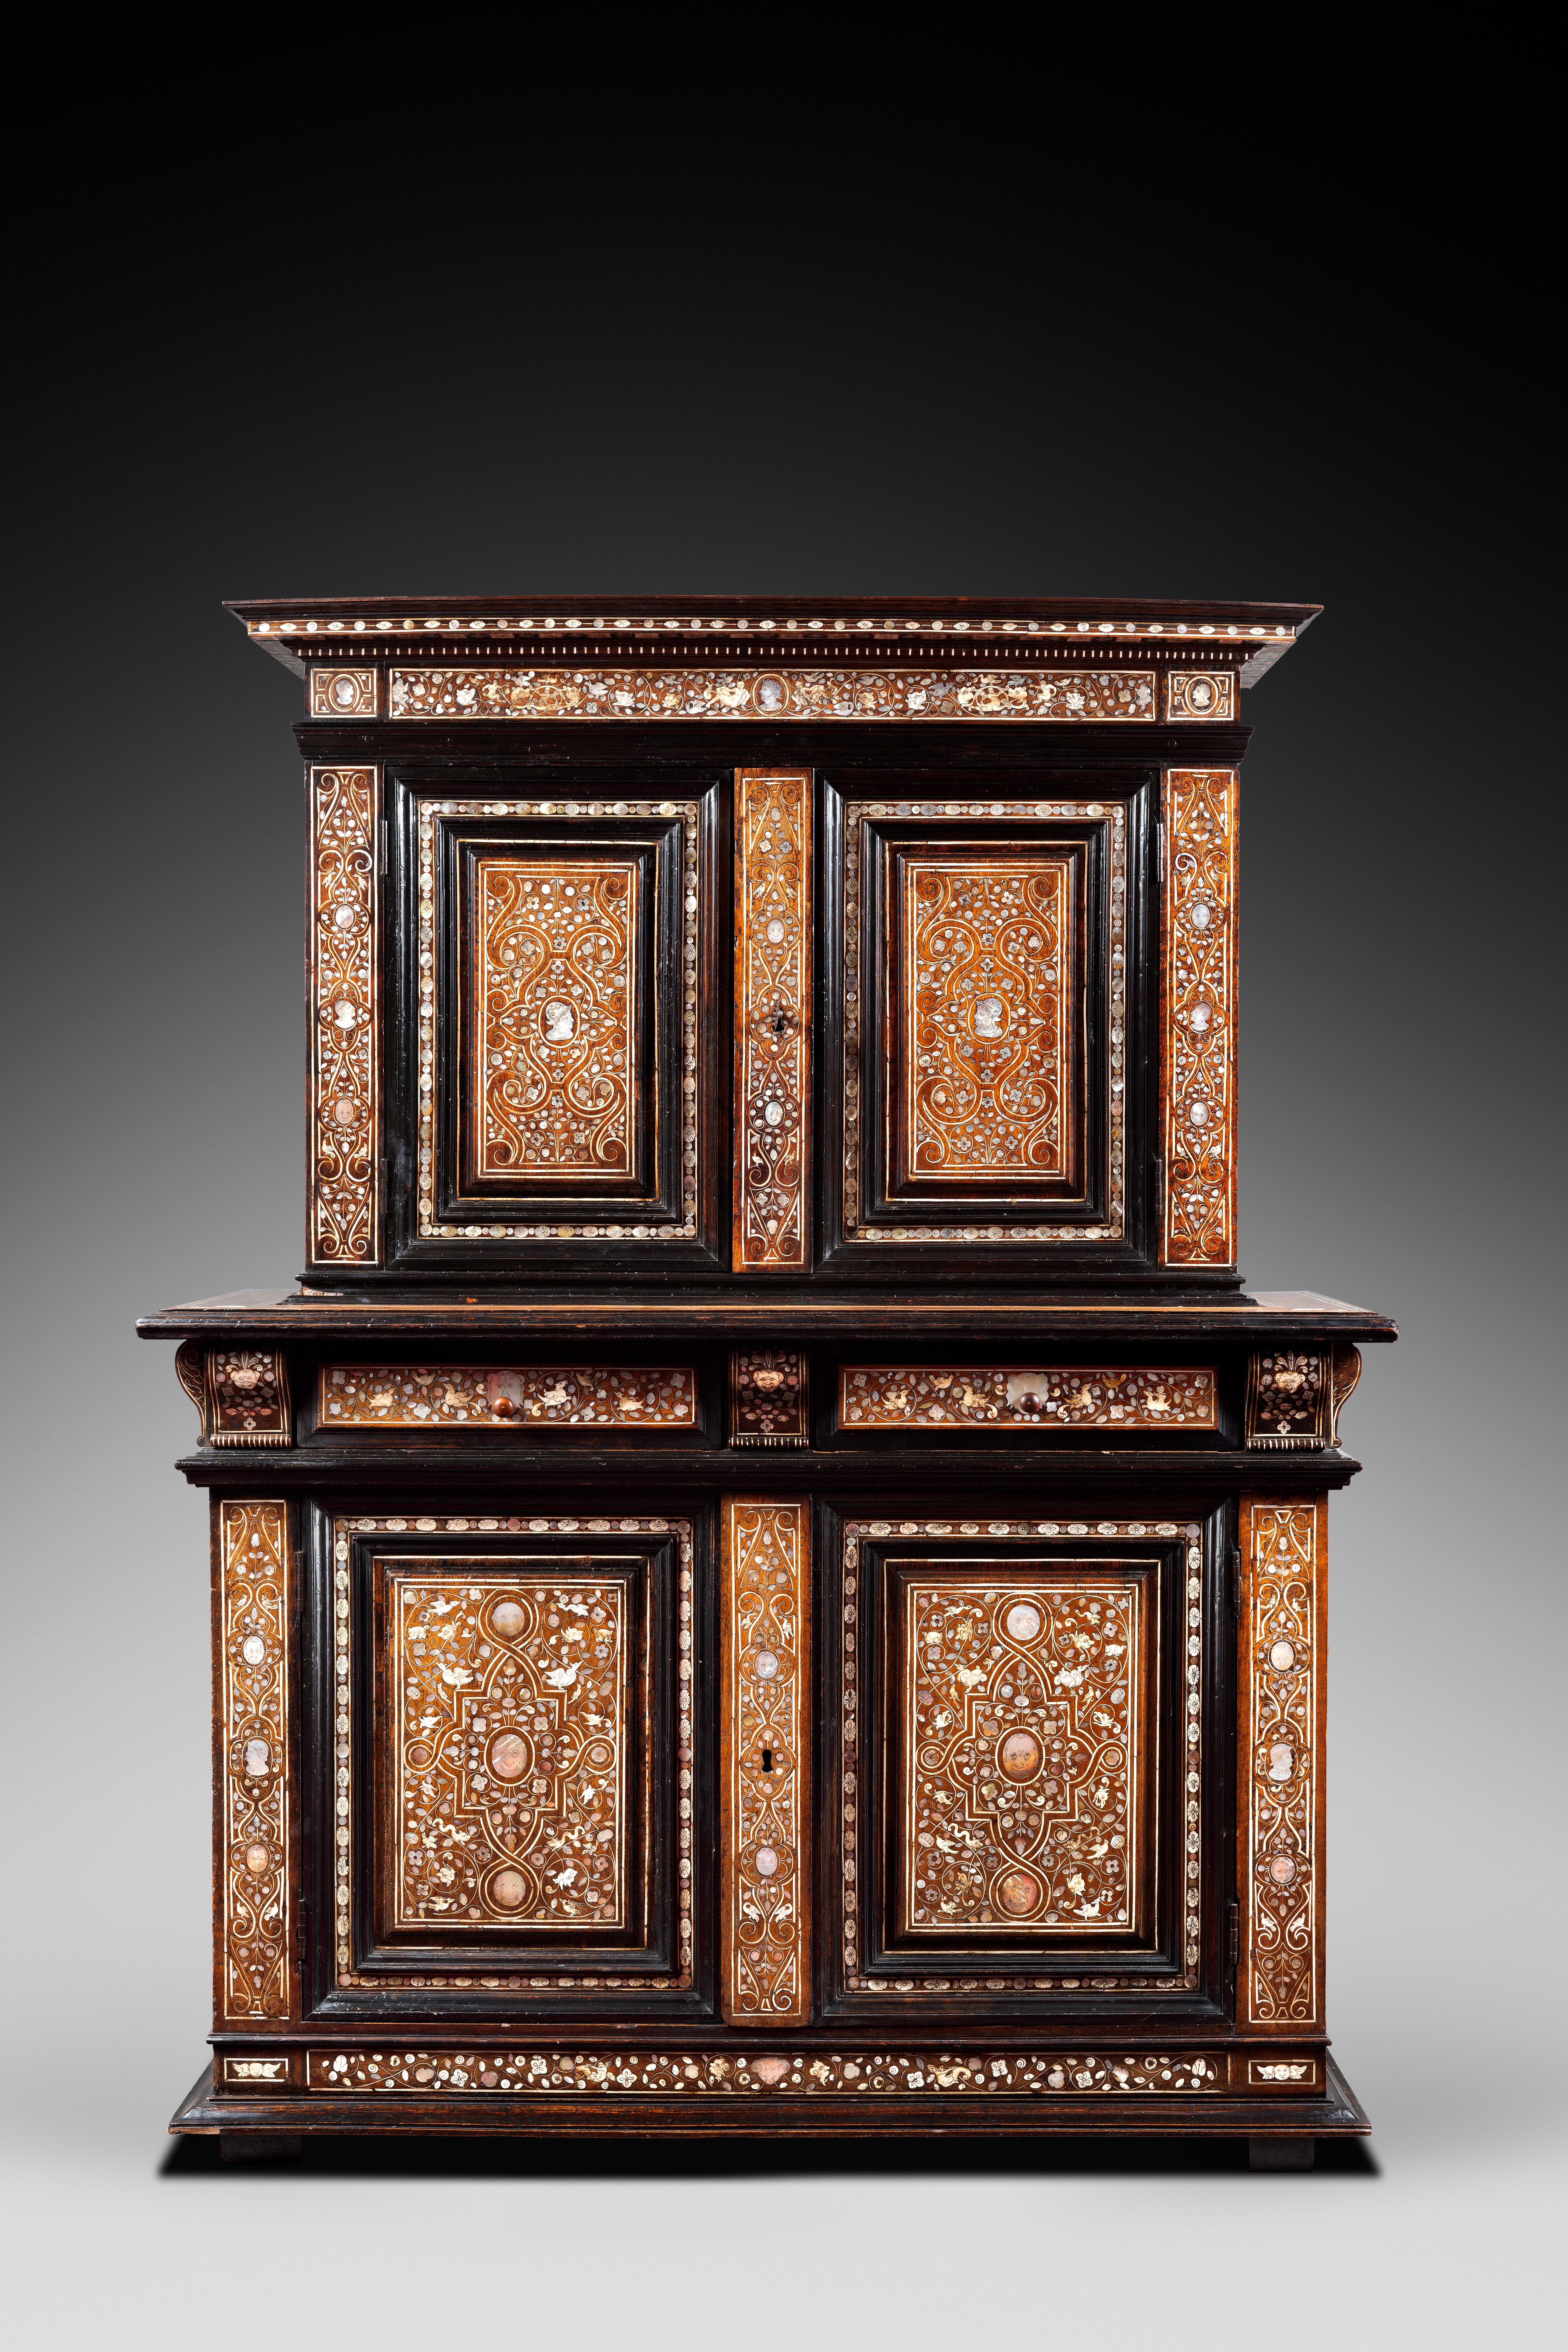 Important Renaissance cabinet with mother-of-pearl and ivory inlays

Origin: Loire Valley, France
period: 16th century

Height: 180cm
Length: 140cm
Depth: 53cm 


Walnut wood, ivory, mother-of-pearl
Good condition

This two-bodied